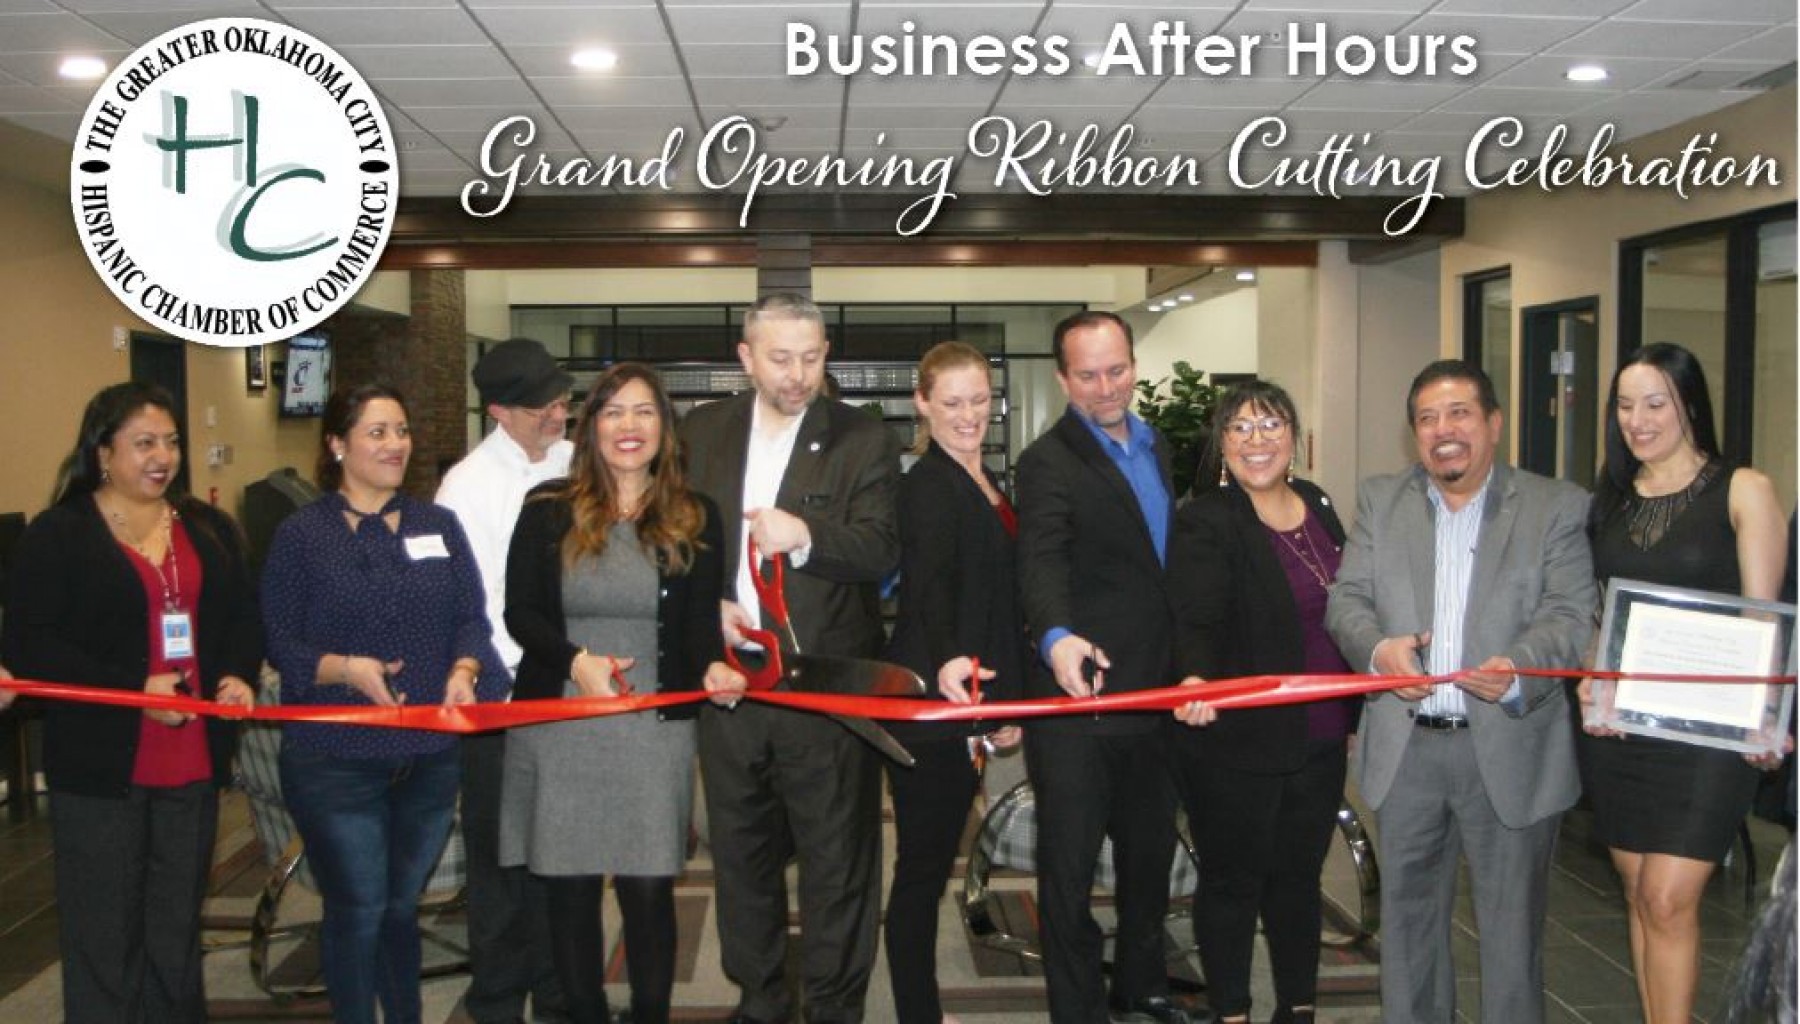 Business After Hours Grand Opening Ribbon Cutting Celebration